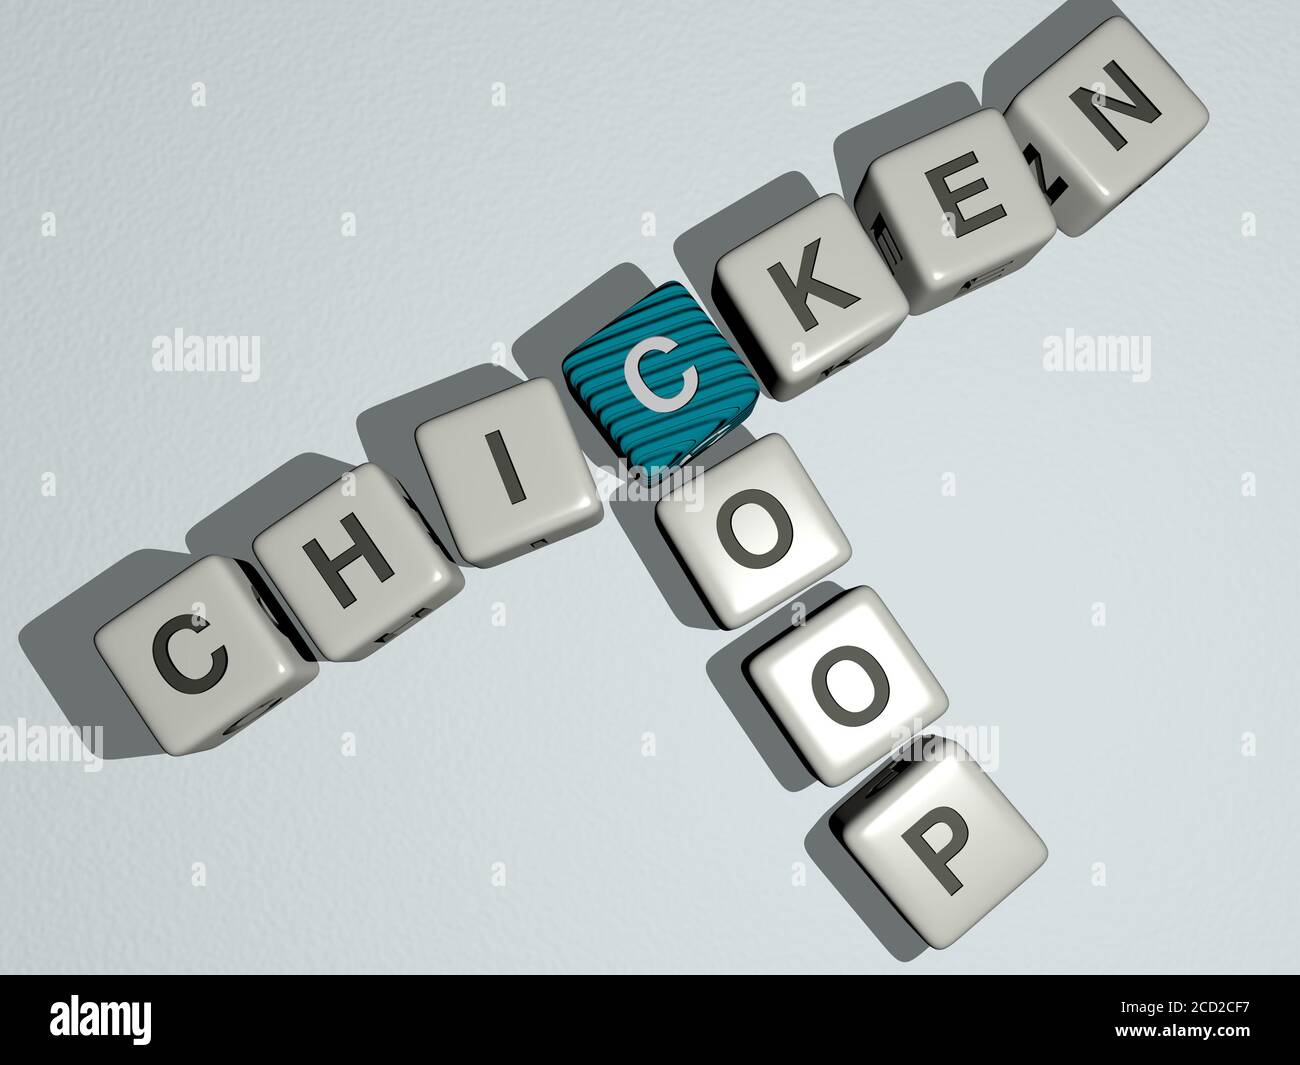 CHICKEN COOP crossword by cubic dice letters 3D illustration Stock